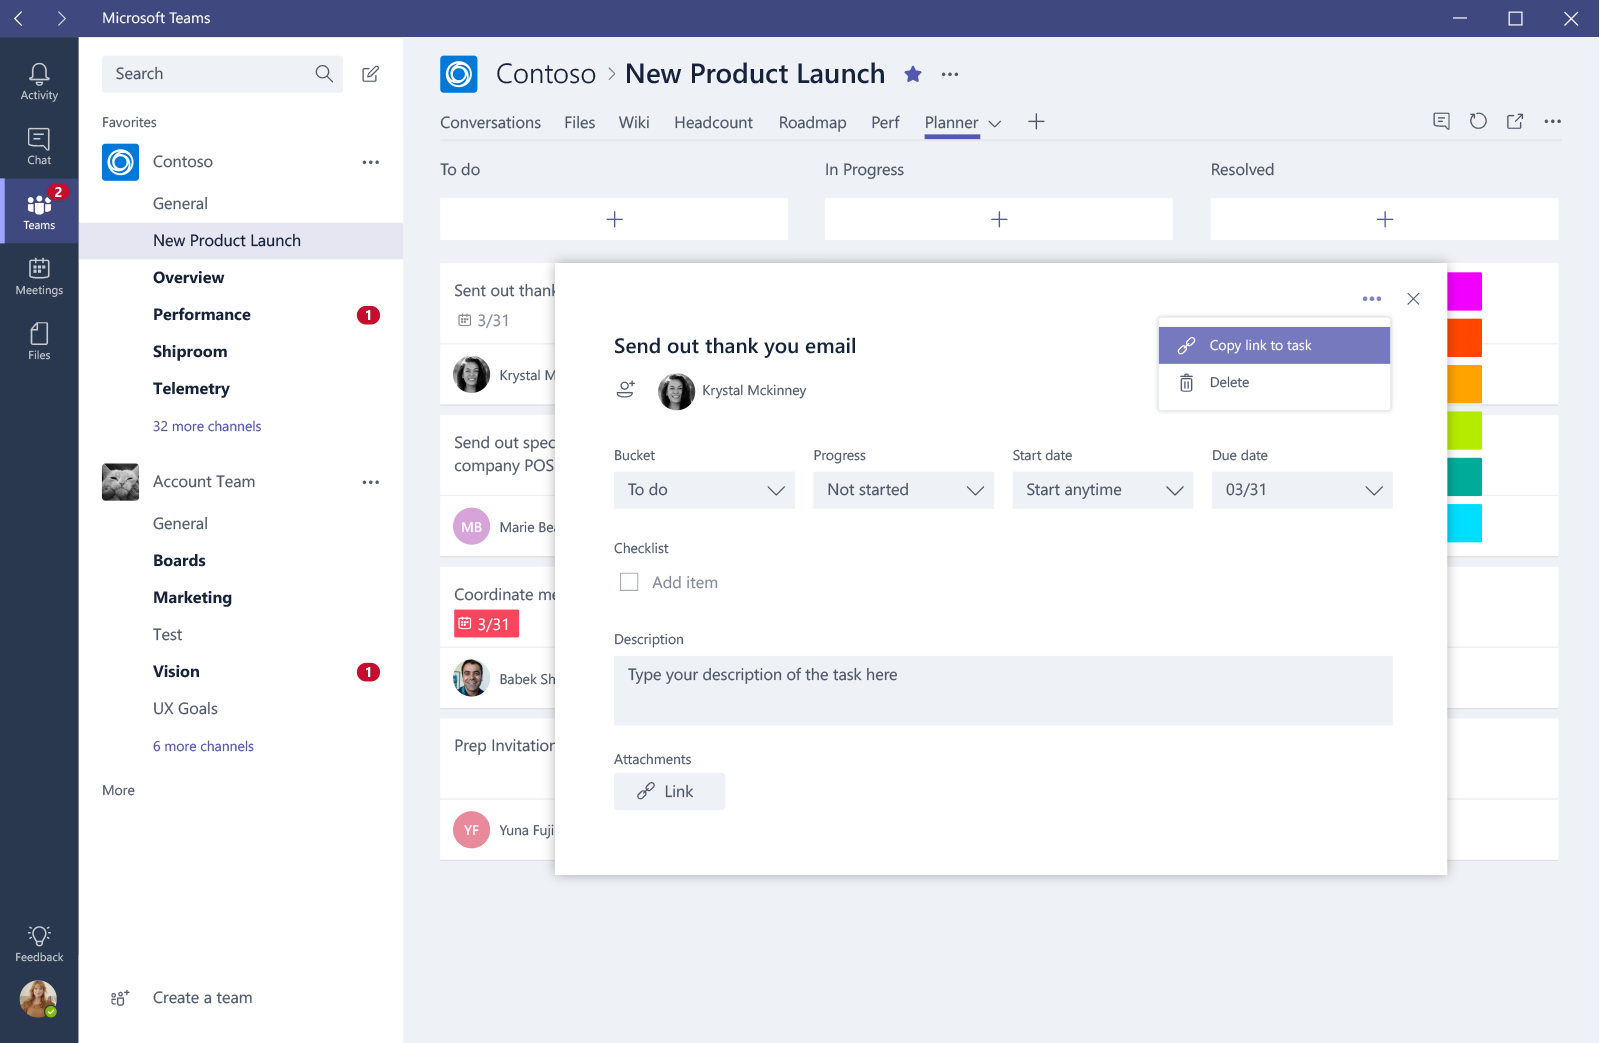 a-few-updates-to-planner-integration-in-microsoft-teams